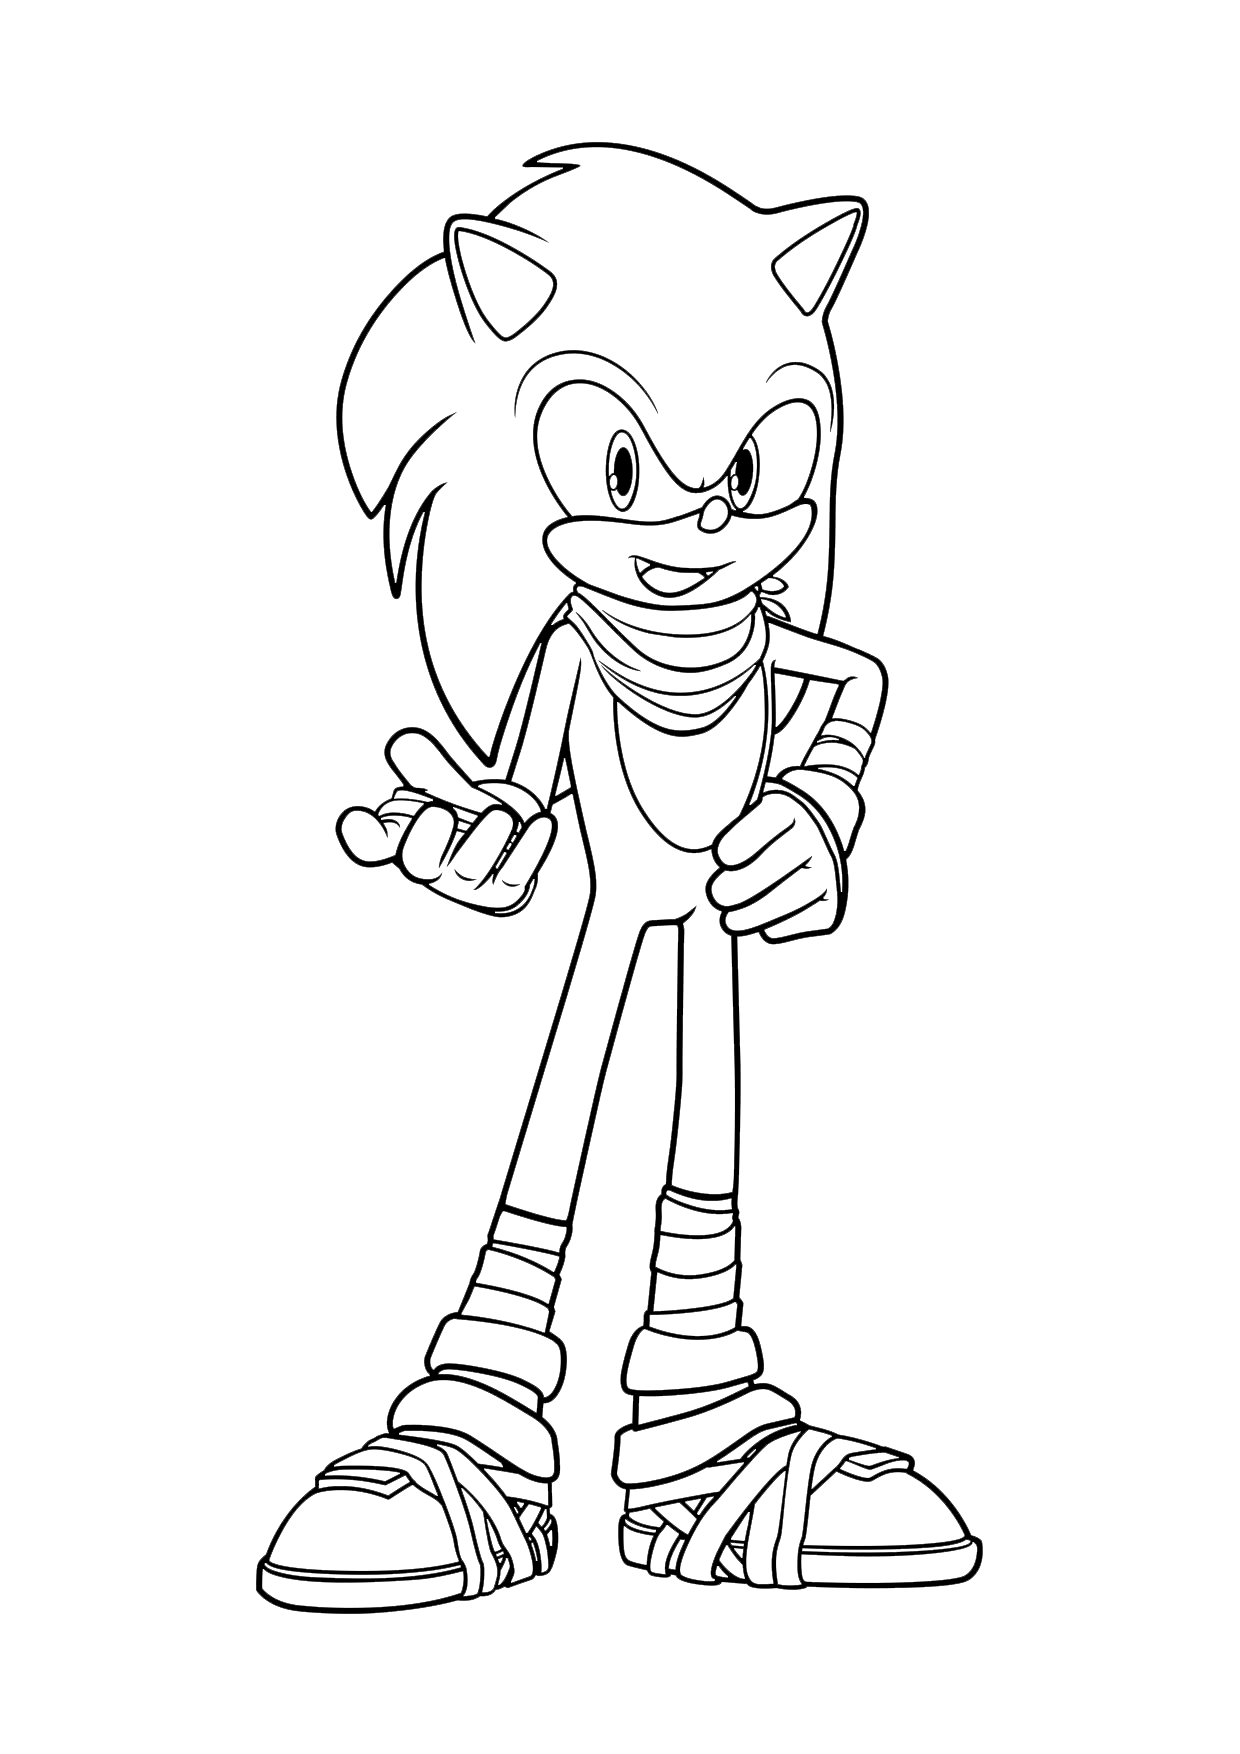 Sonic Ready To Fight para colorir